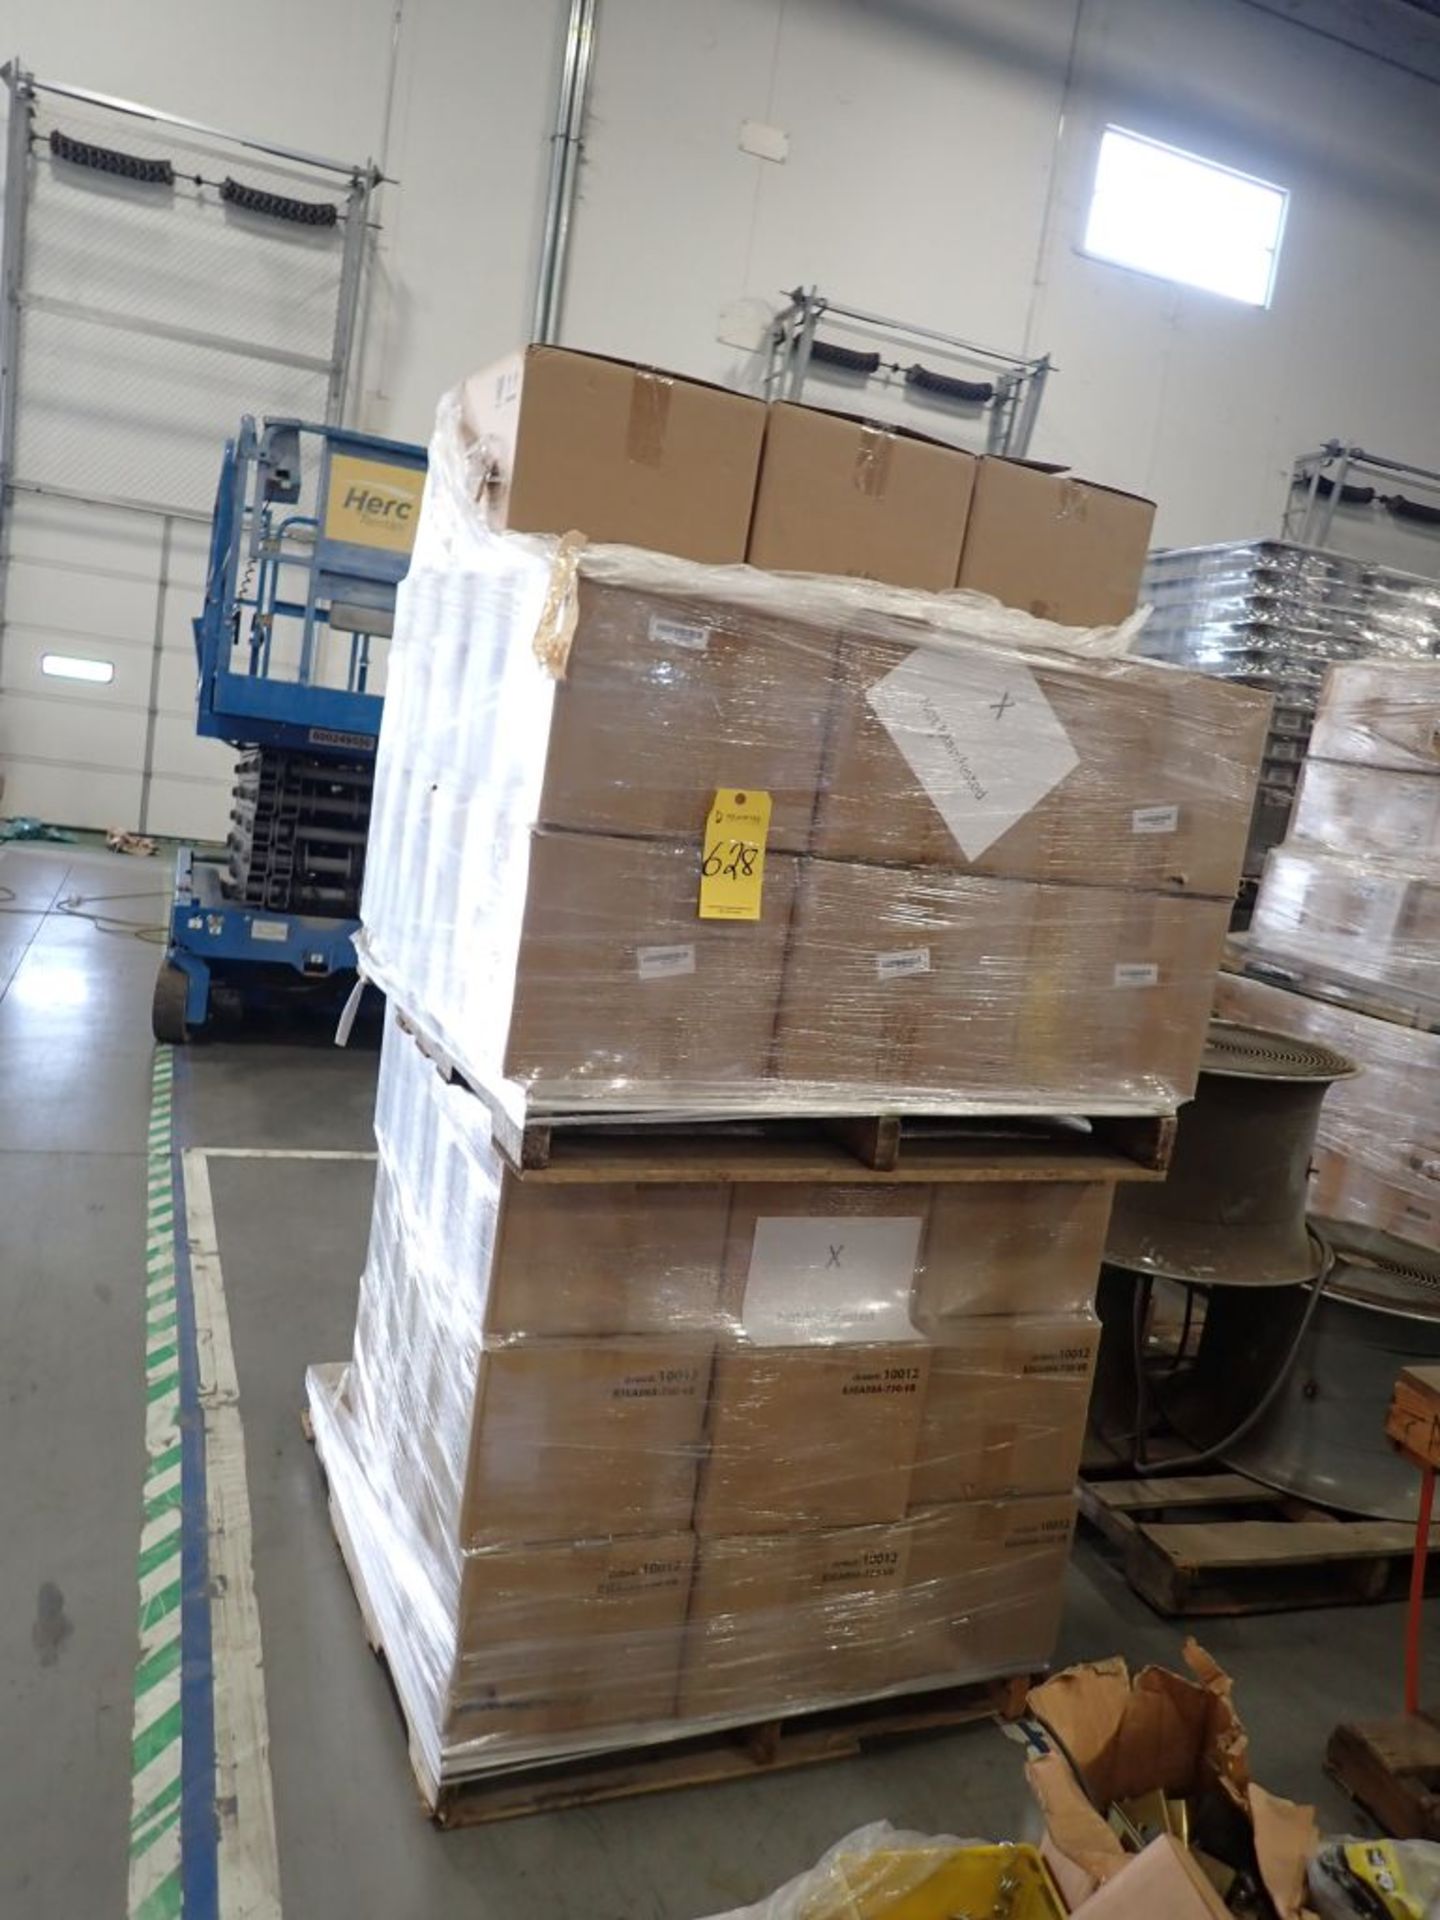 Lot of (33) Boxes of Energetic Lighting